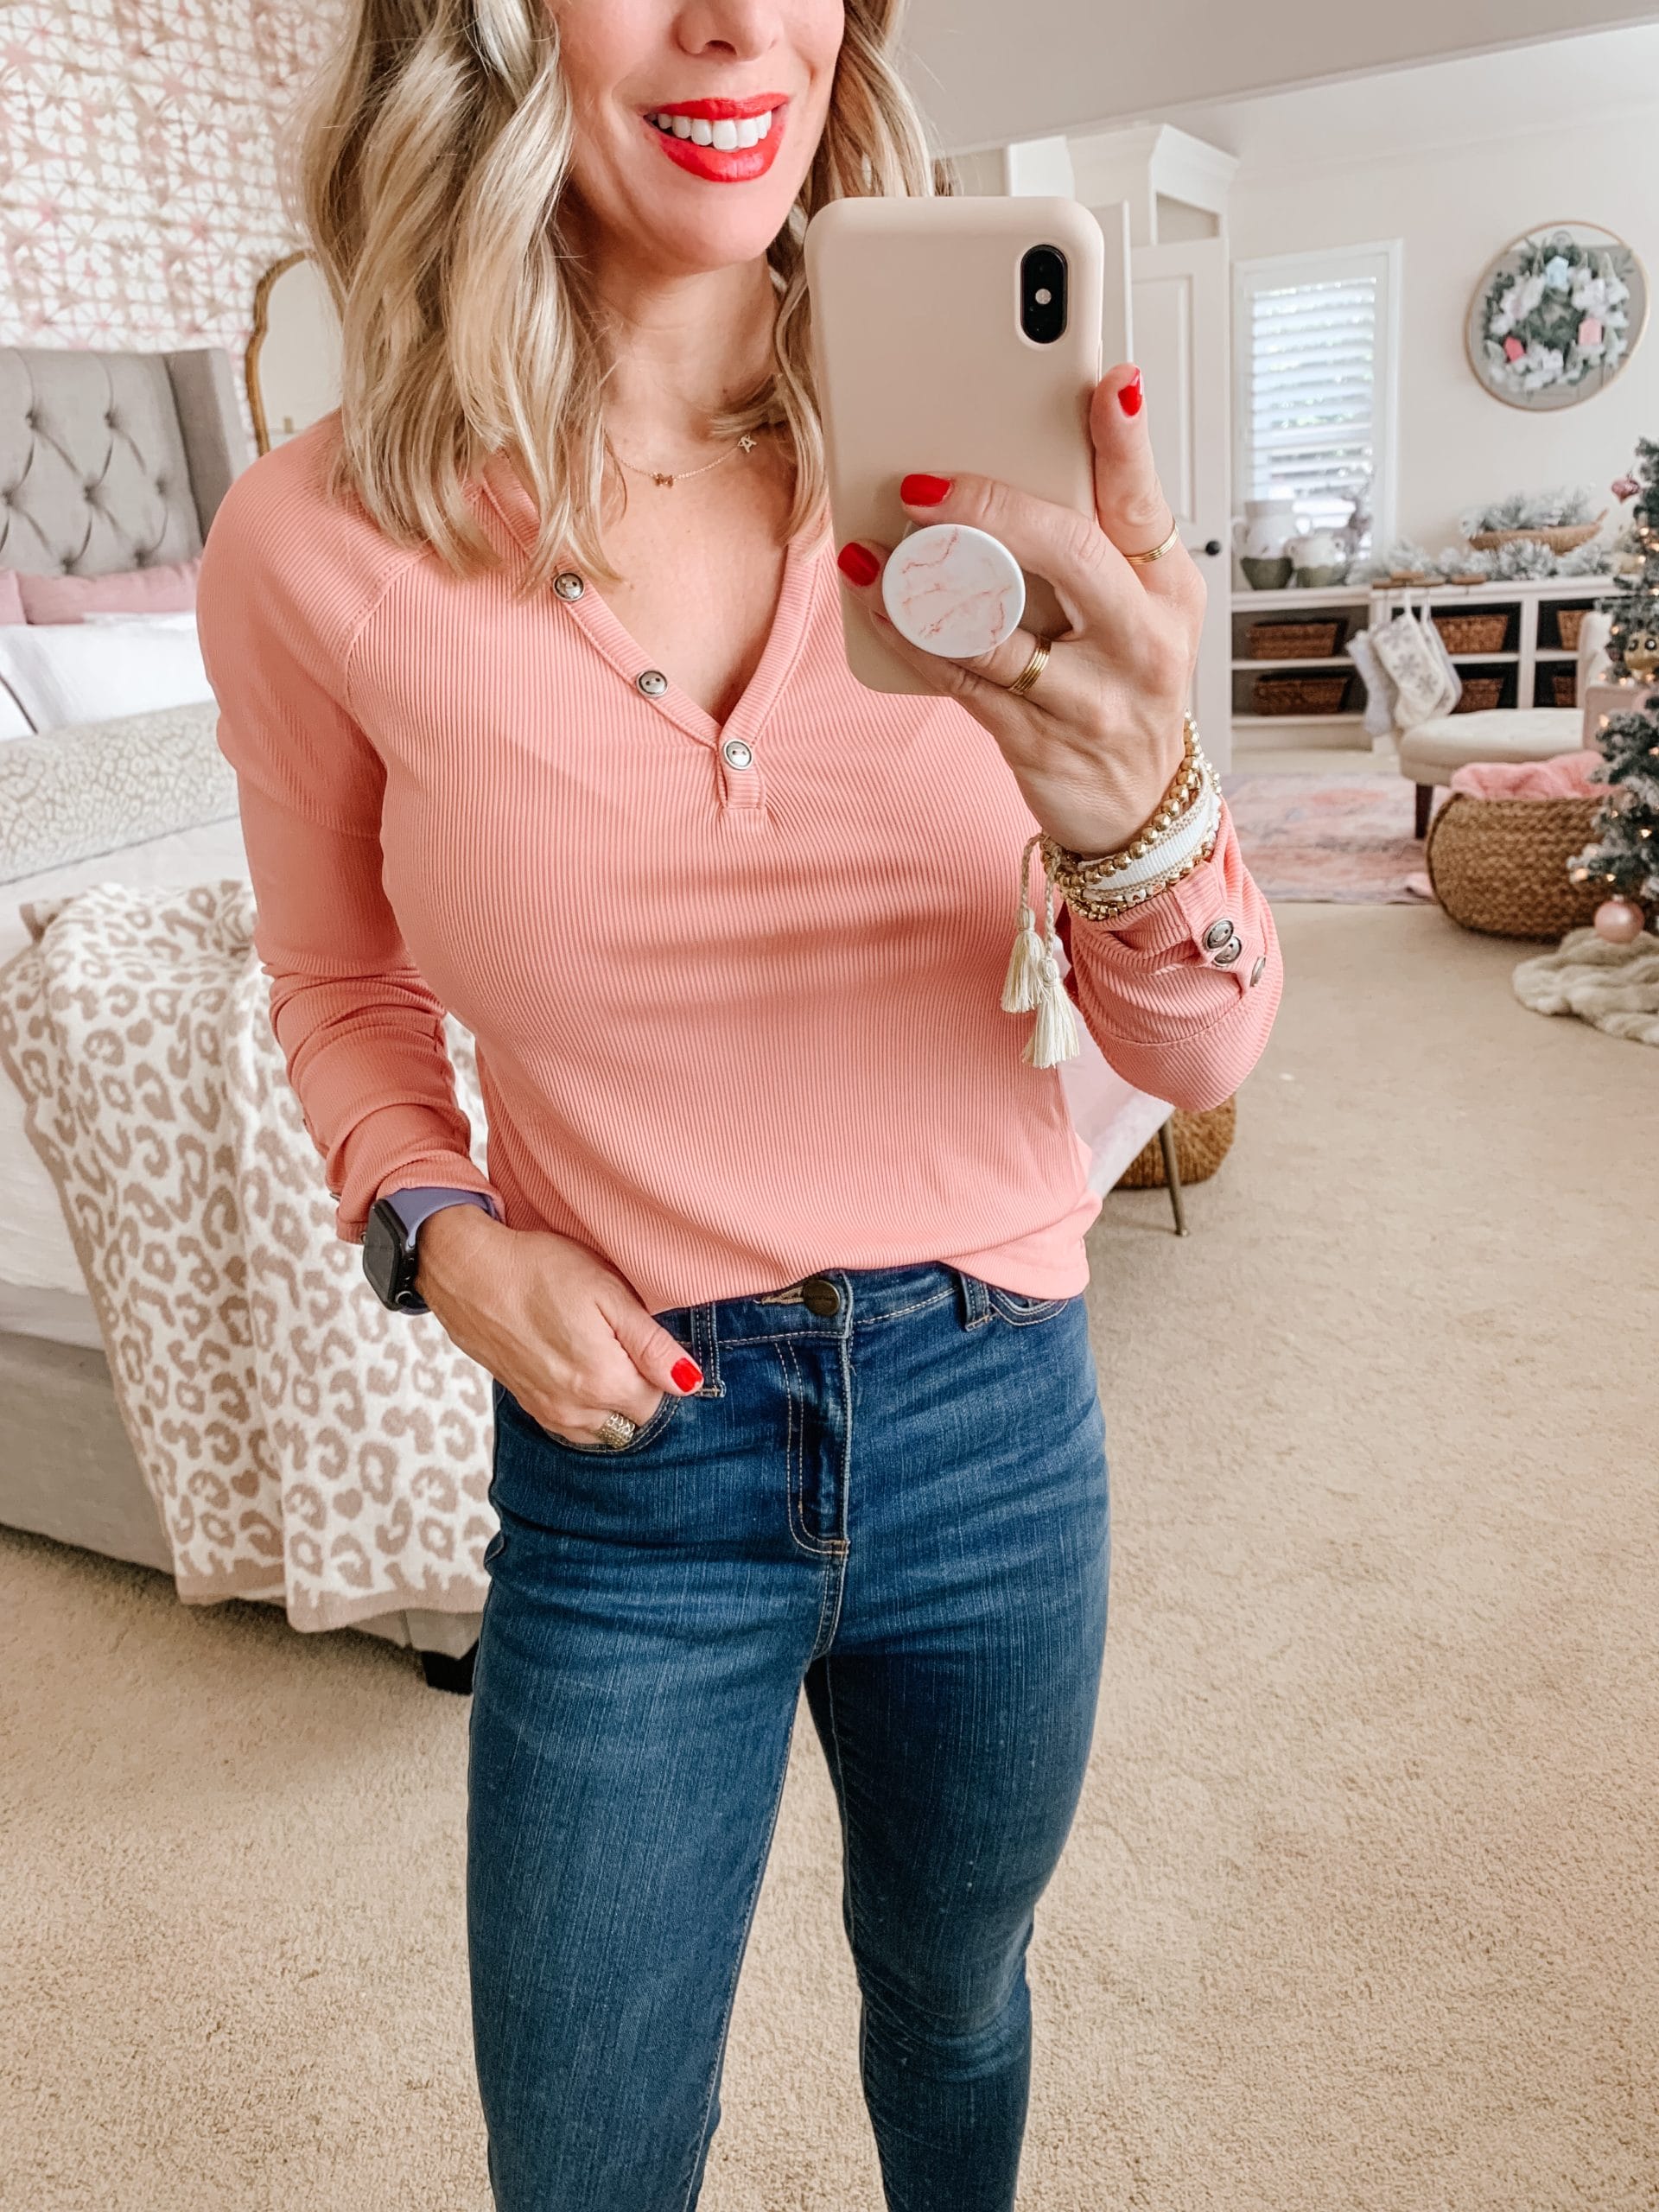 Amazon Fashion, Henley Top, Jeans, Booties 